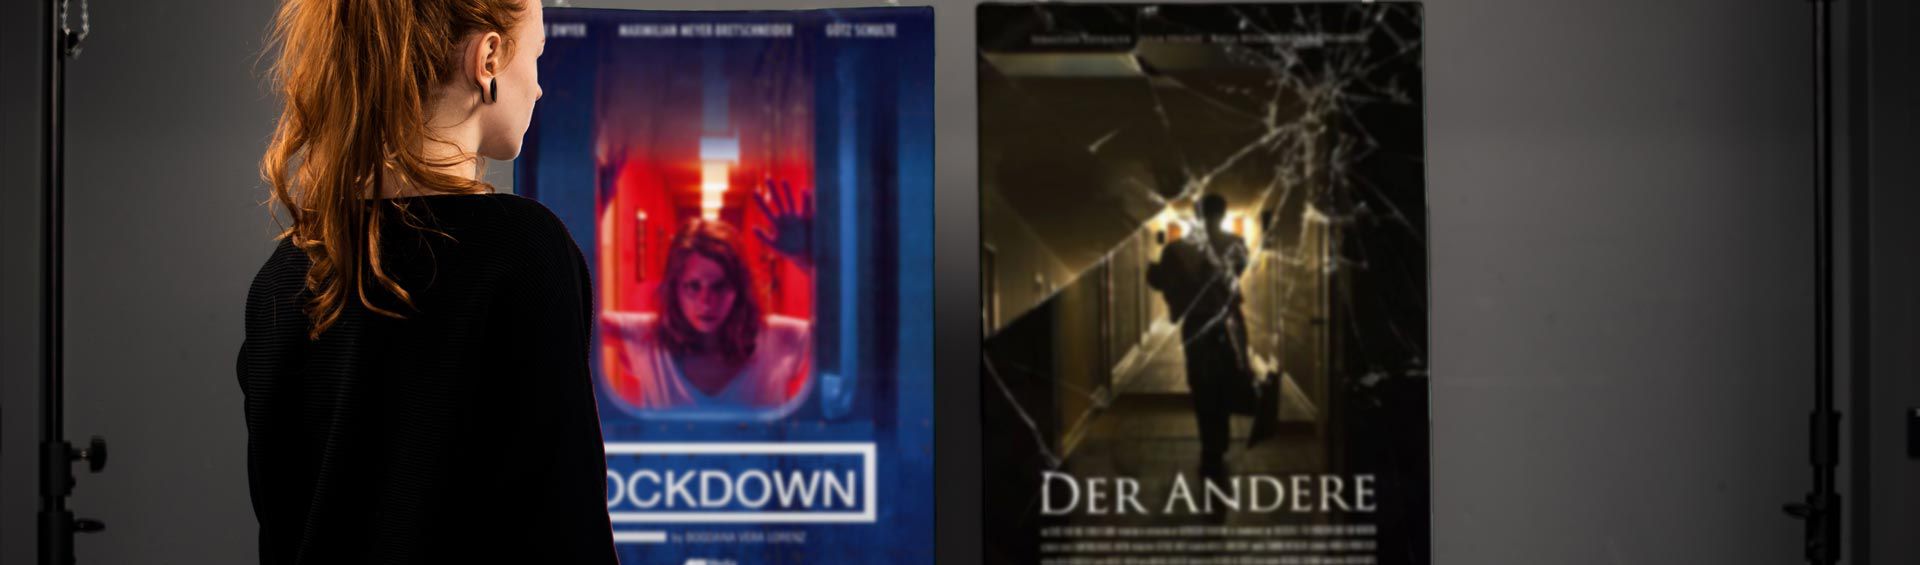 Photography of Nina Lesznik standing in front of hanging film posters for her production design projects "Lockdown" and "Der Andere"